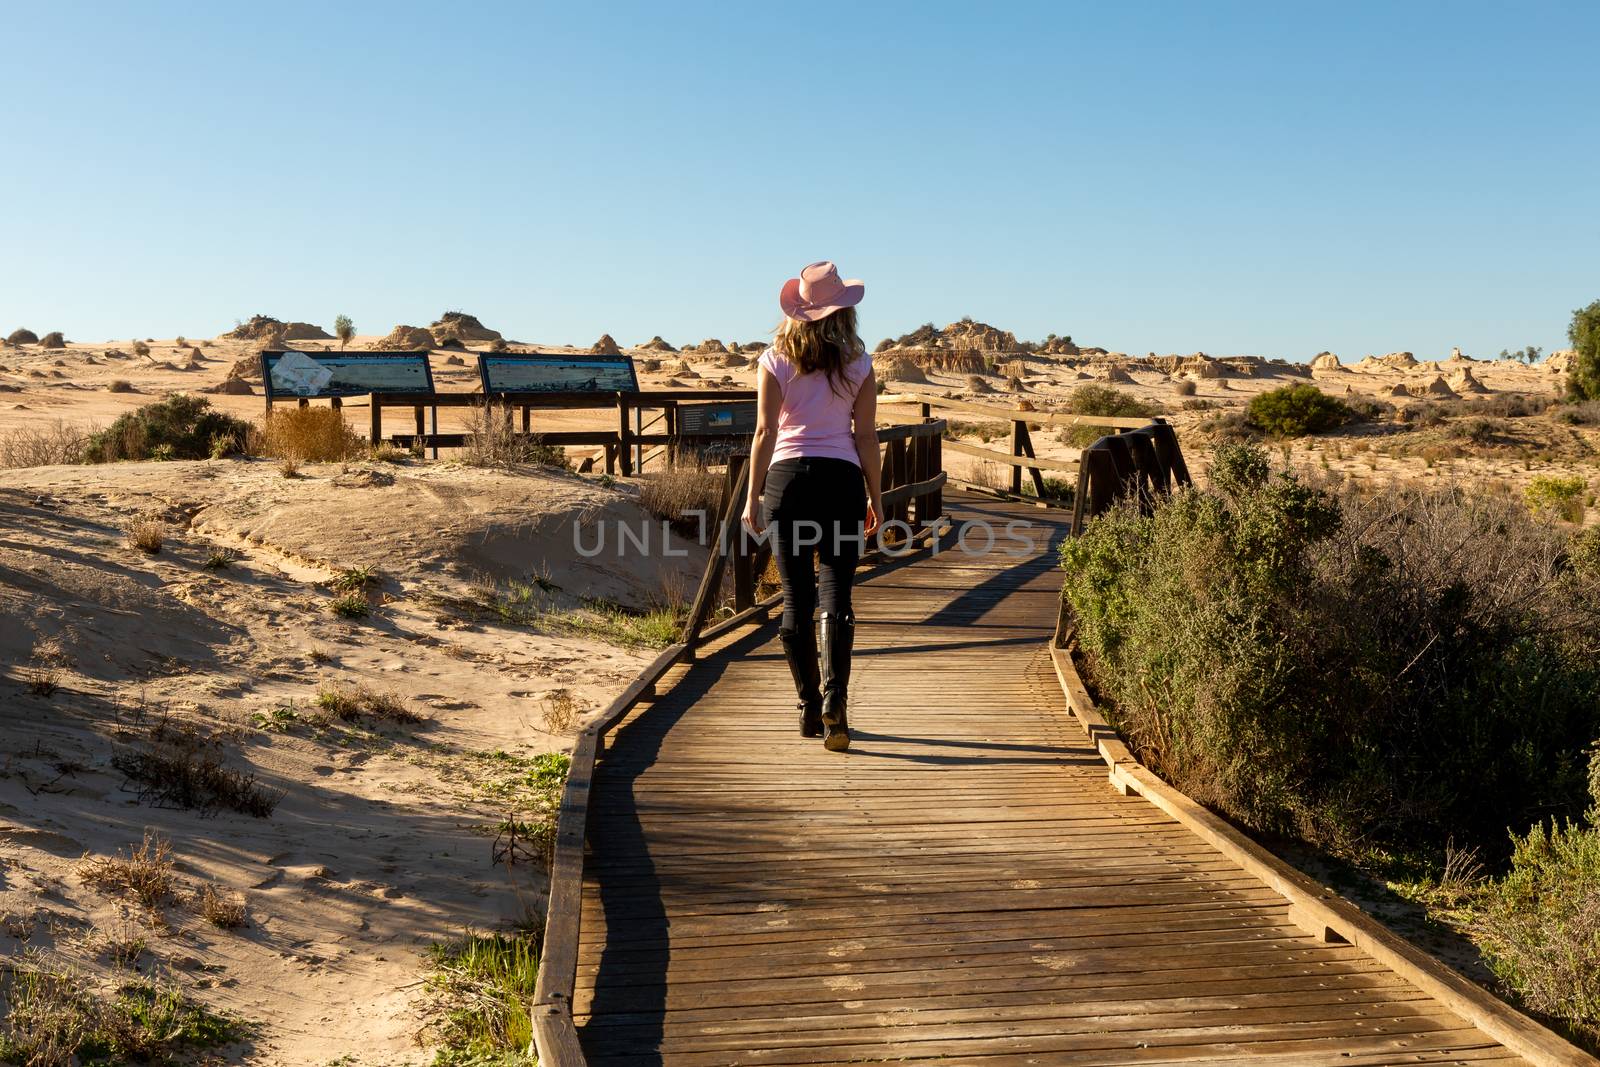 Tourist visitor to the desert and Mungo National Park by lovleah